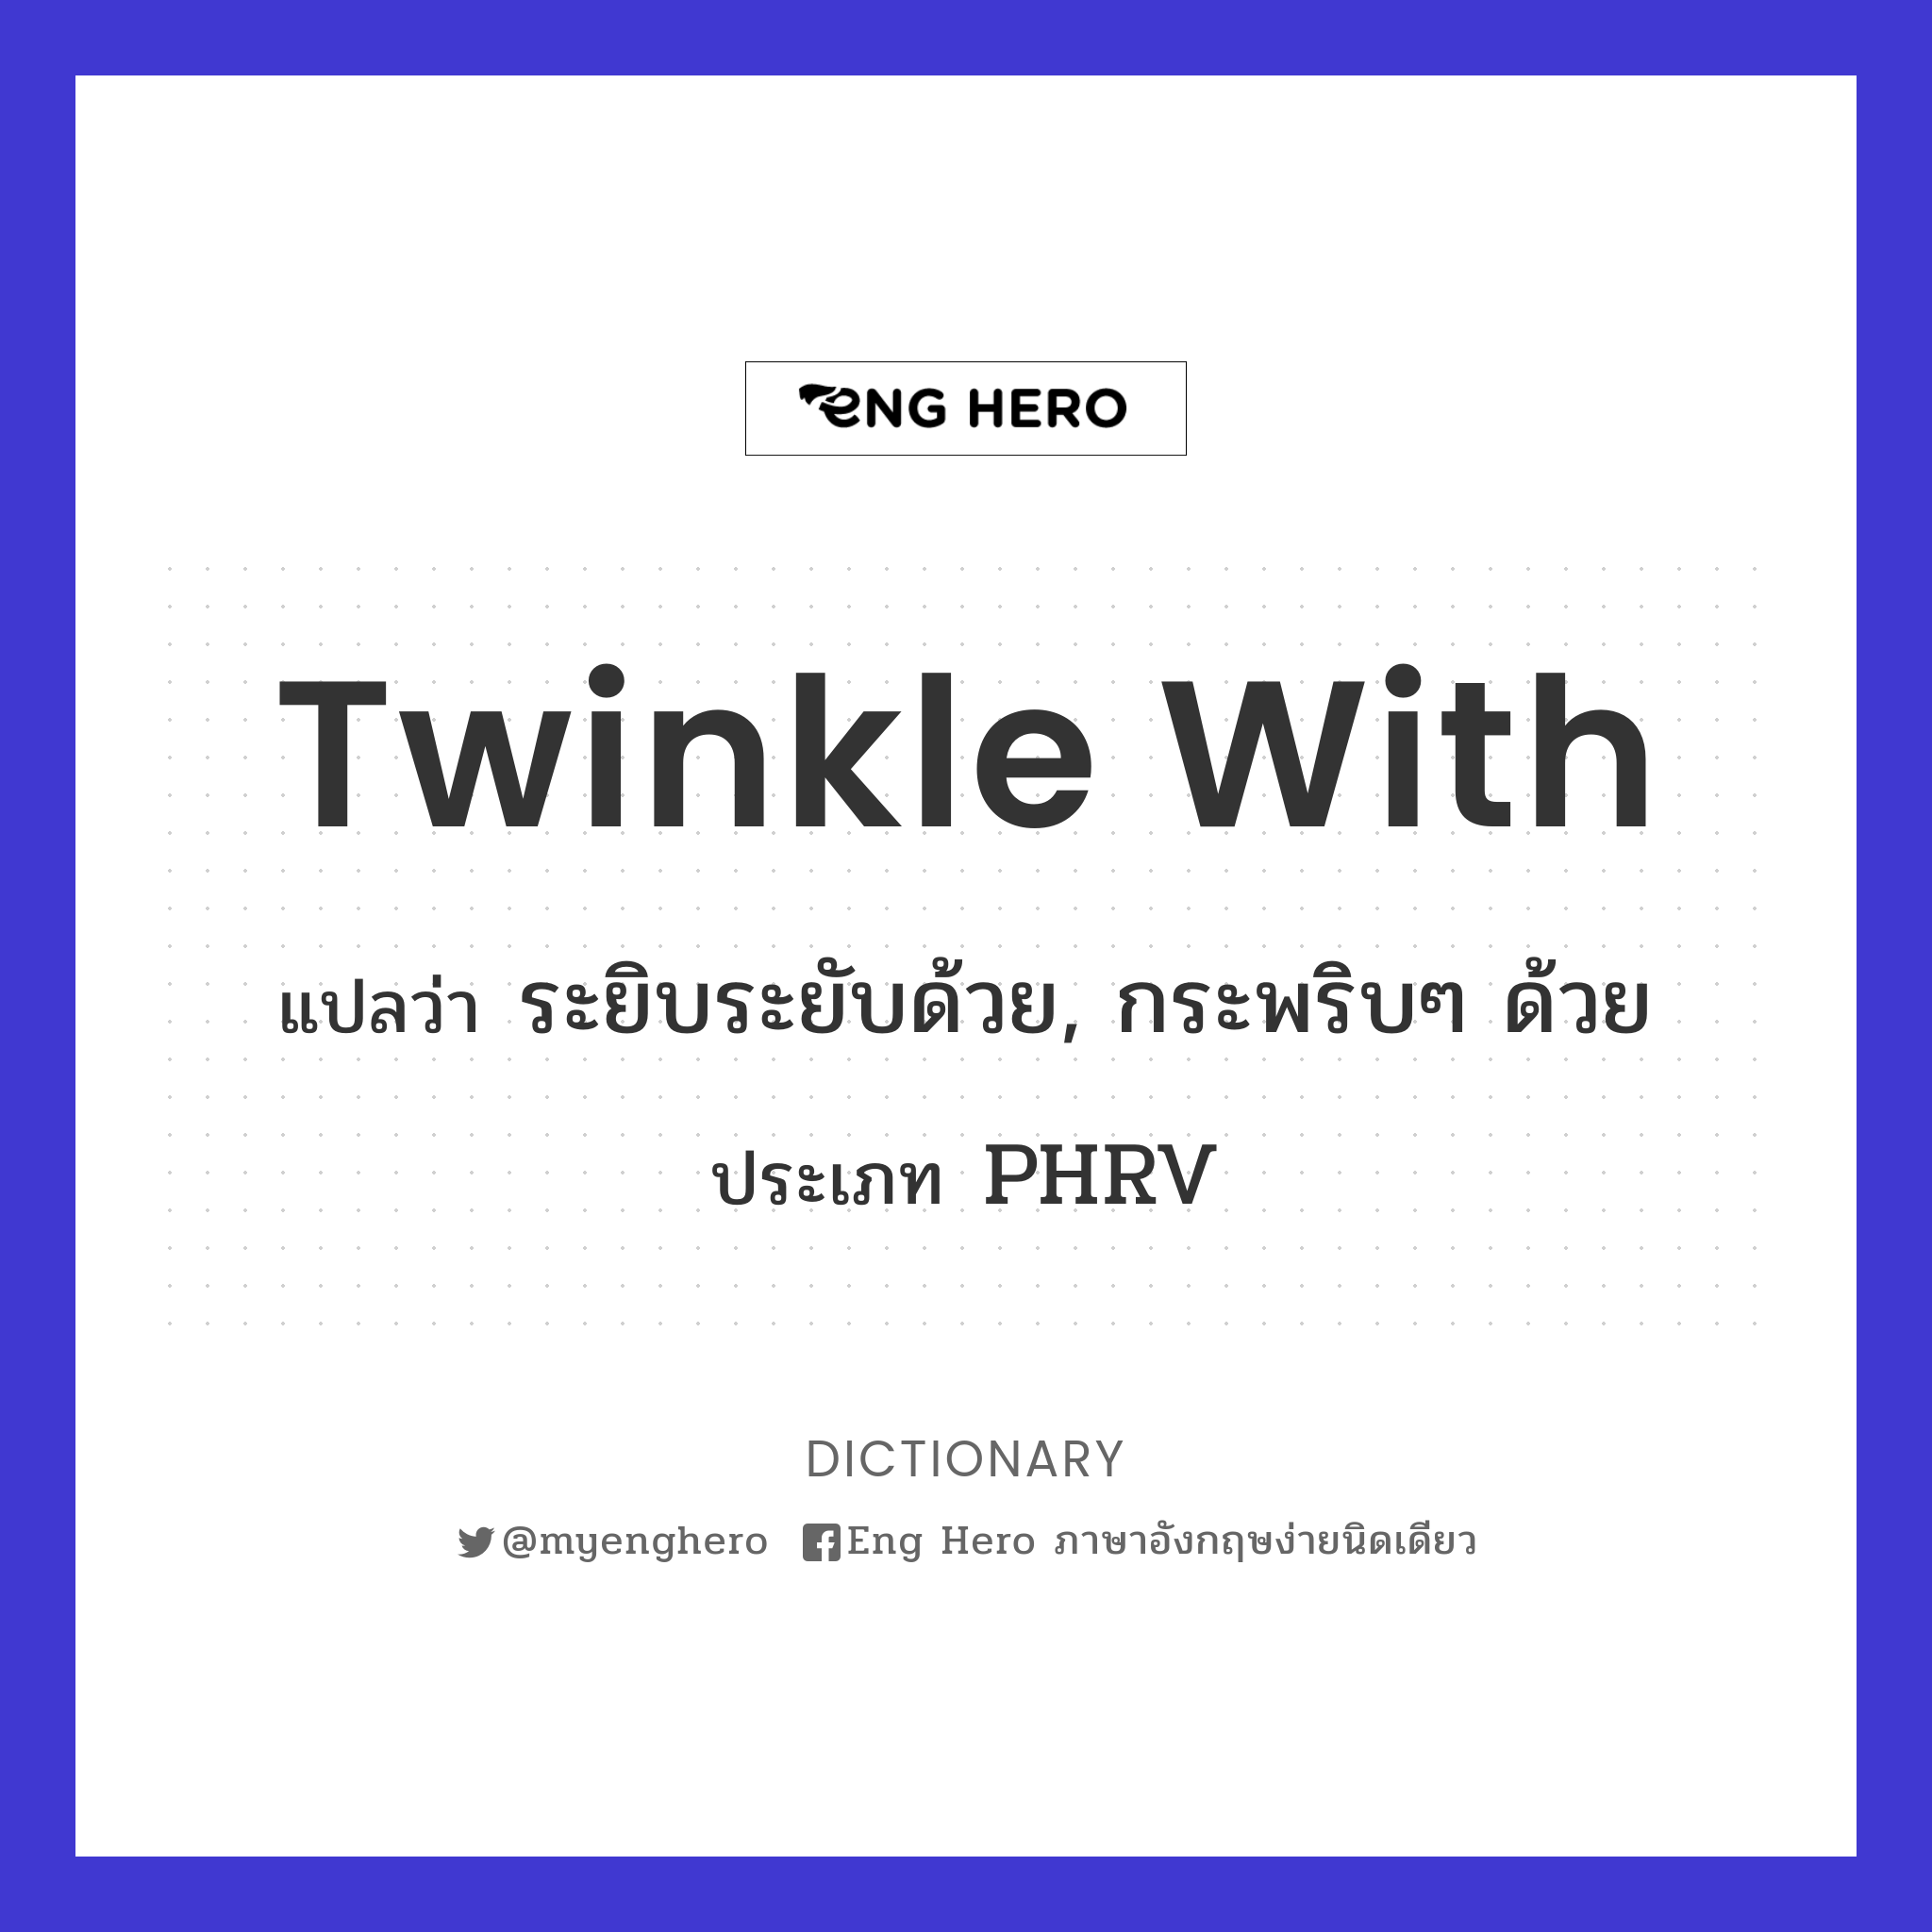 twinkle with